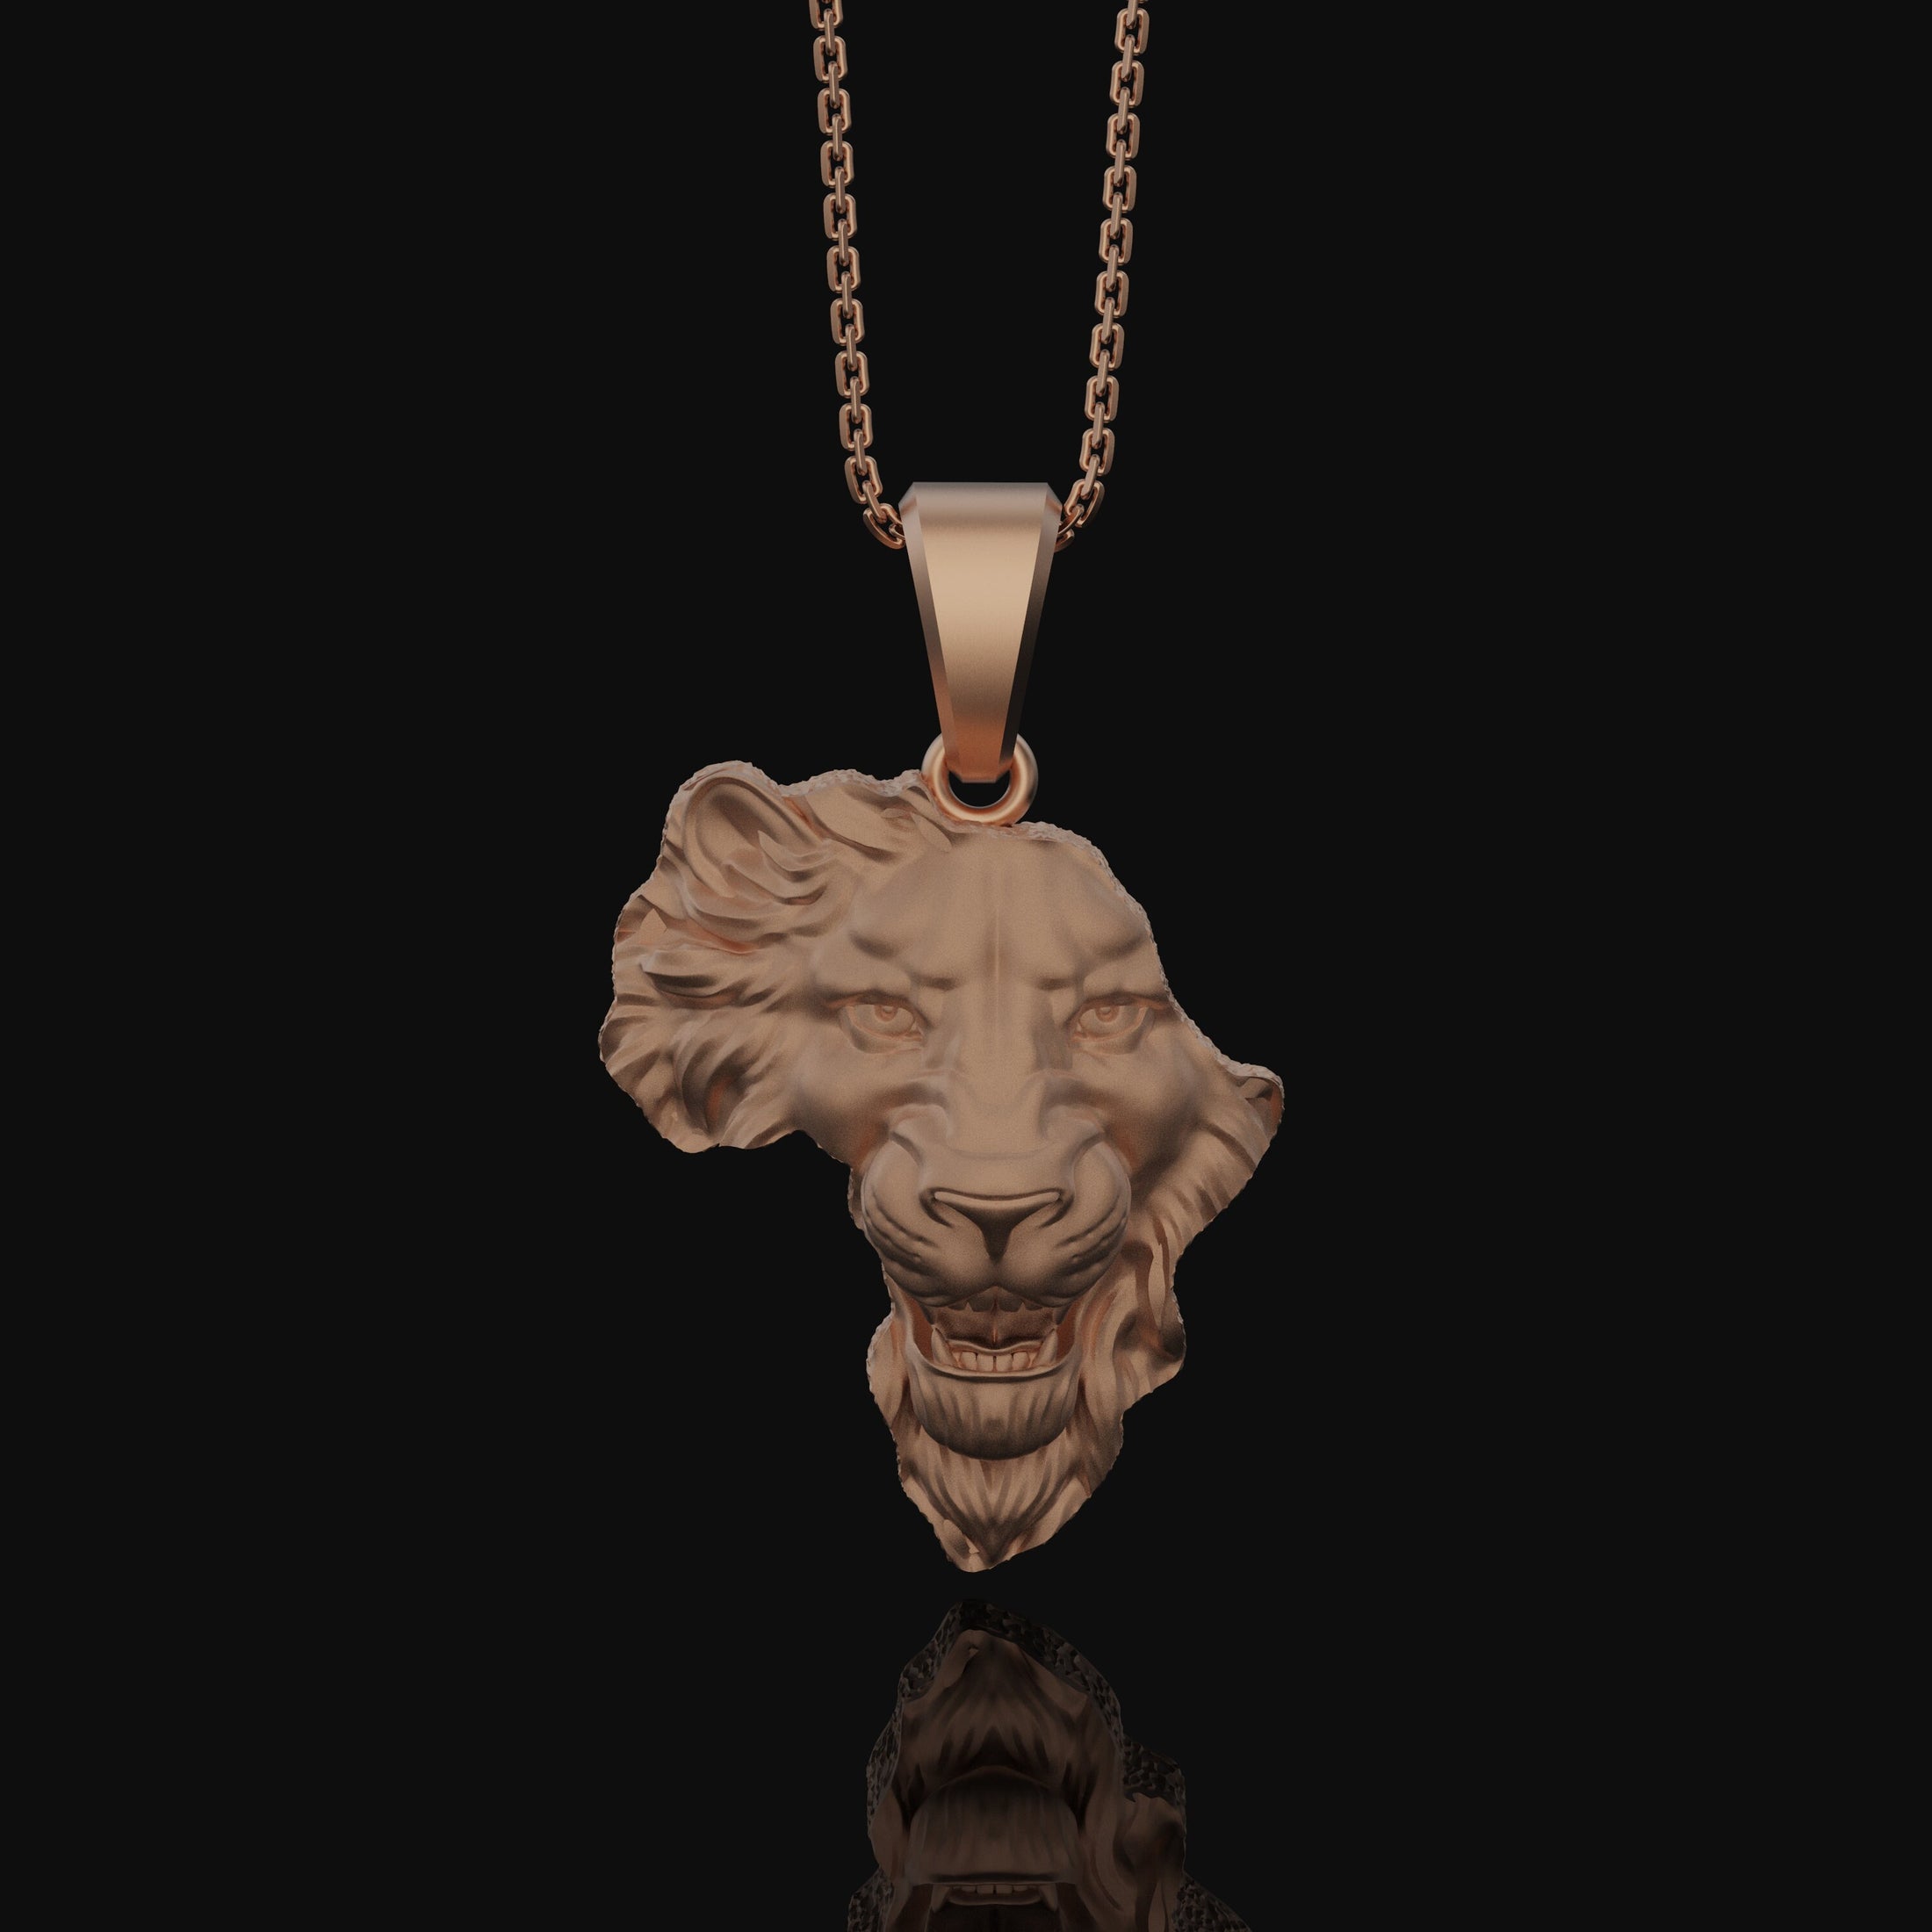 Silver Africa Continent Shaped Lion Head Necklace - Majestic Safari Style Pendant, Elegant Wildlife African Pride Jewelry Rose Gold Matte